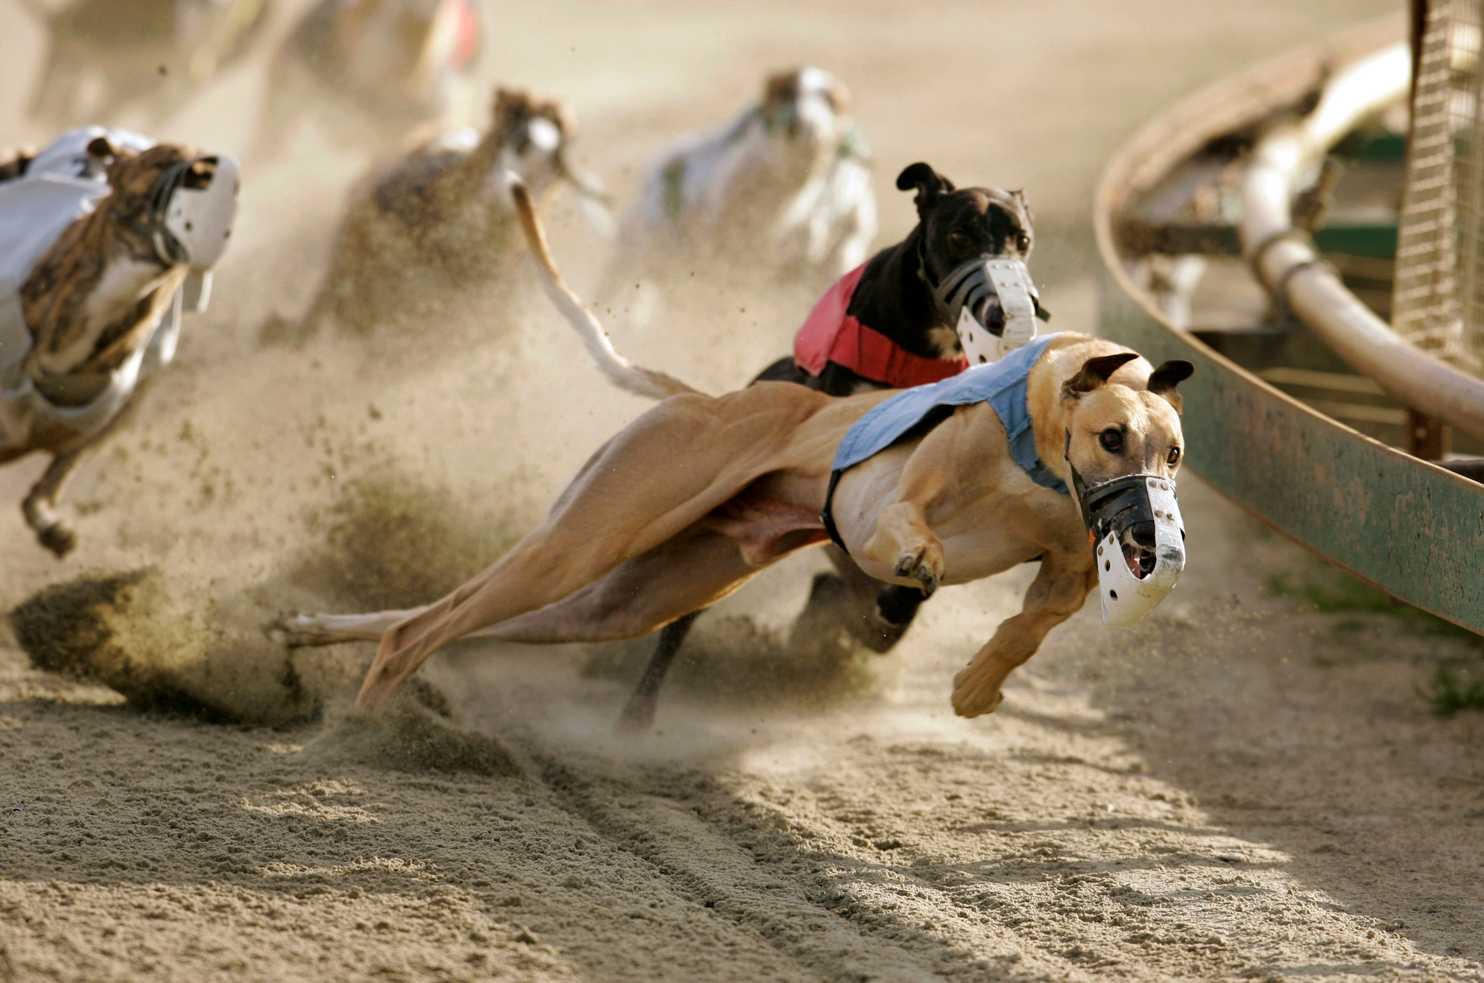 Have gambling and greyhounds run their course? A potential amendment to the Florida constitution